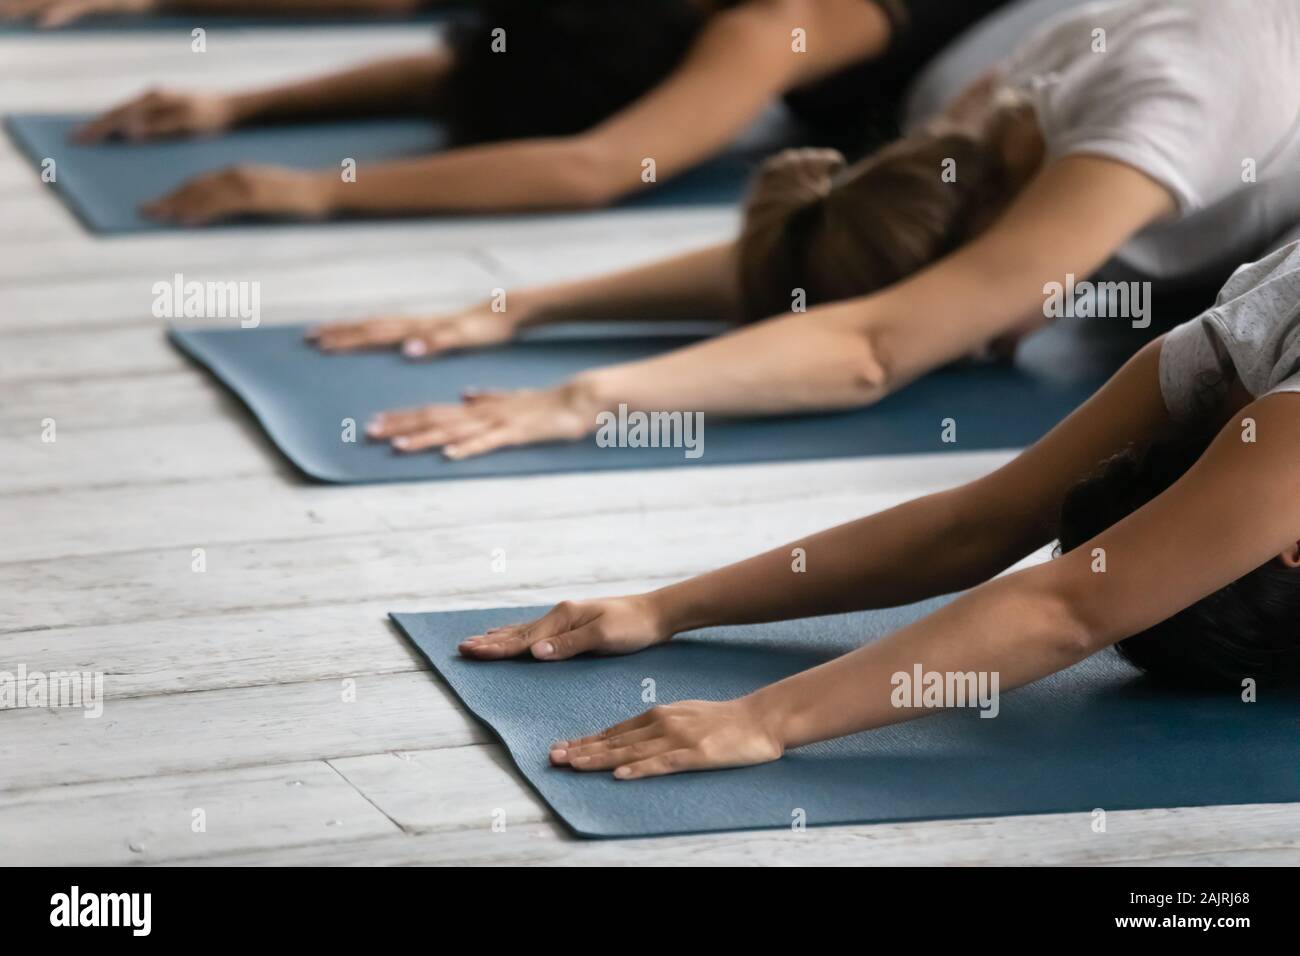 Diverse people practicing yoga close up, doing Child exercise Stock Photo